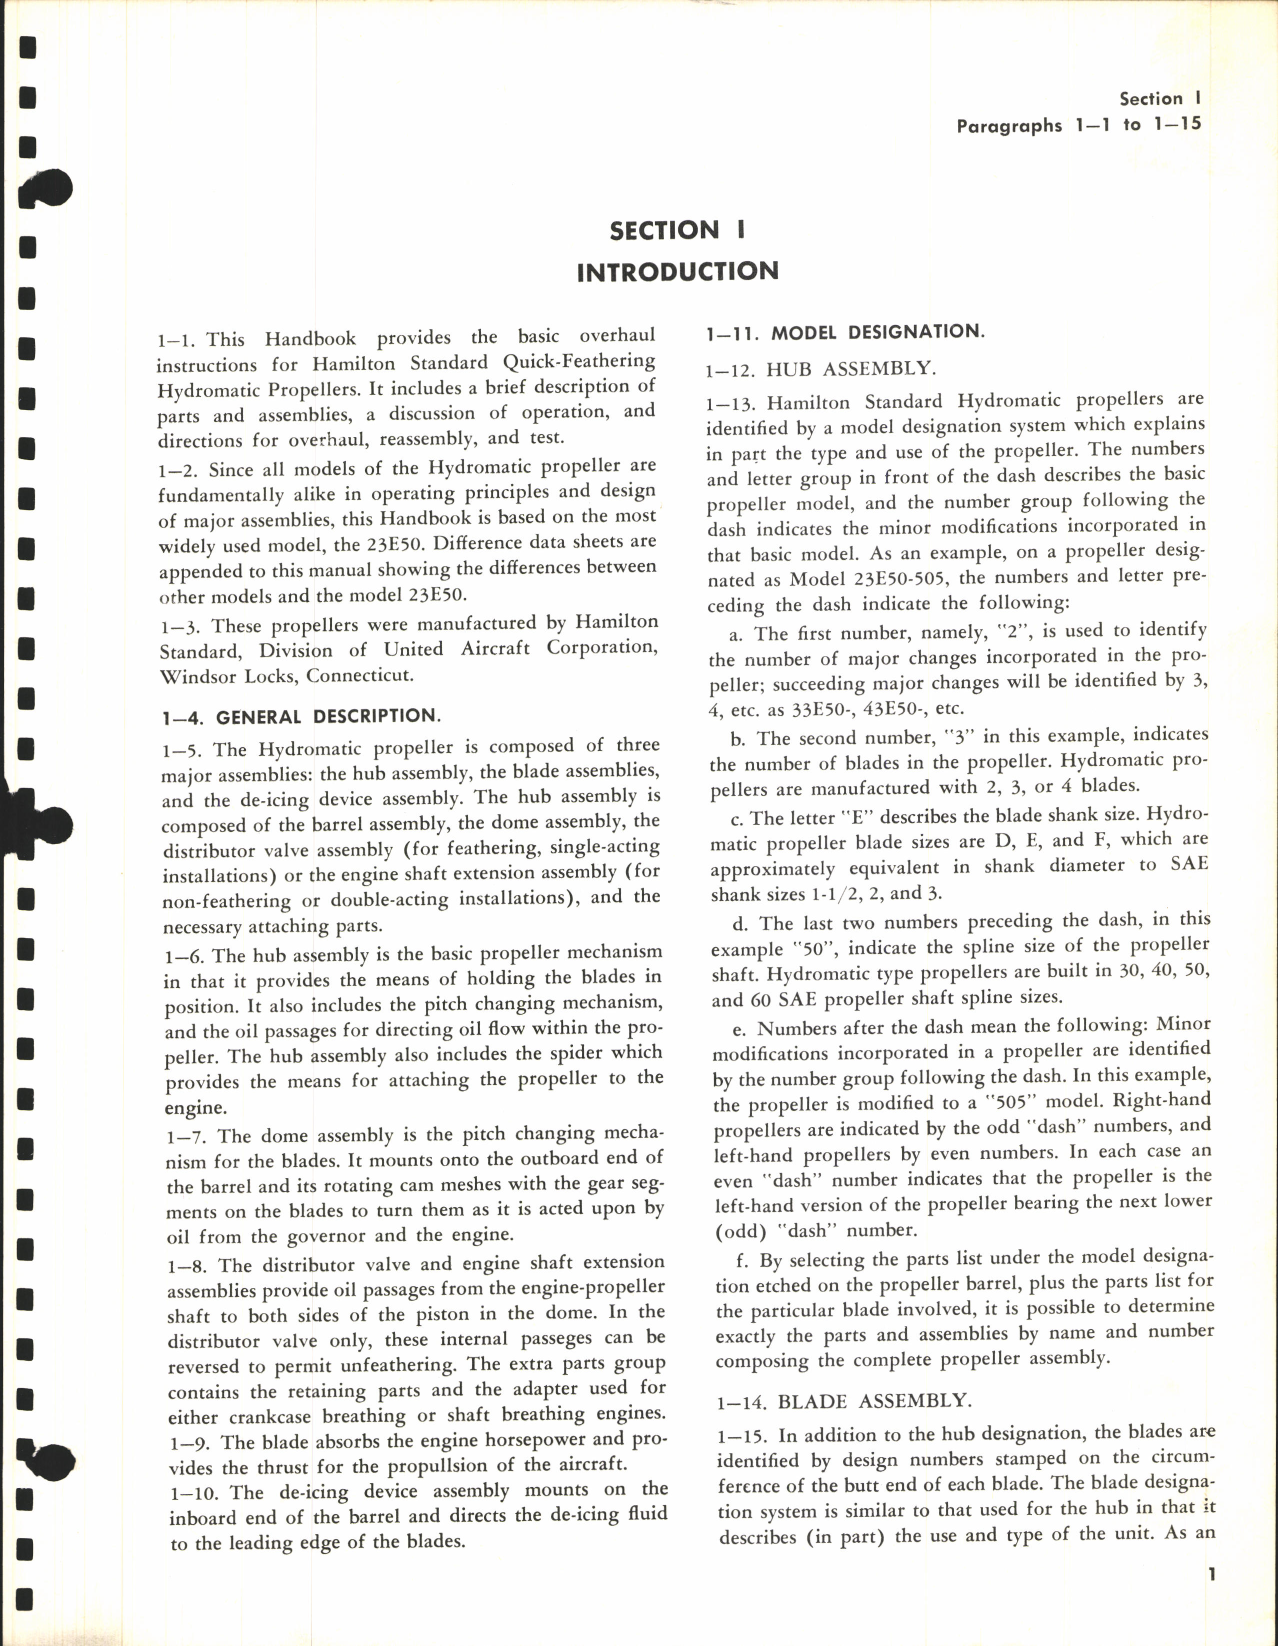 Sample page 7 from AirCorps Library document: Overhaul Manual for Hydromatic Propeller Models 23E50, 23D40, 24D50, 33D50, and 33E60